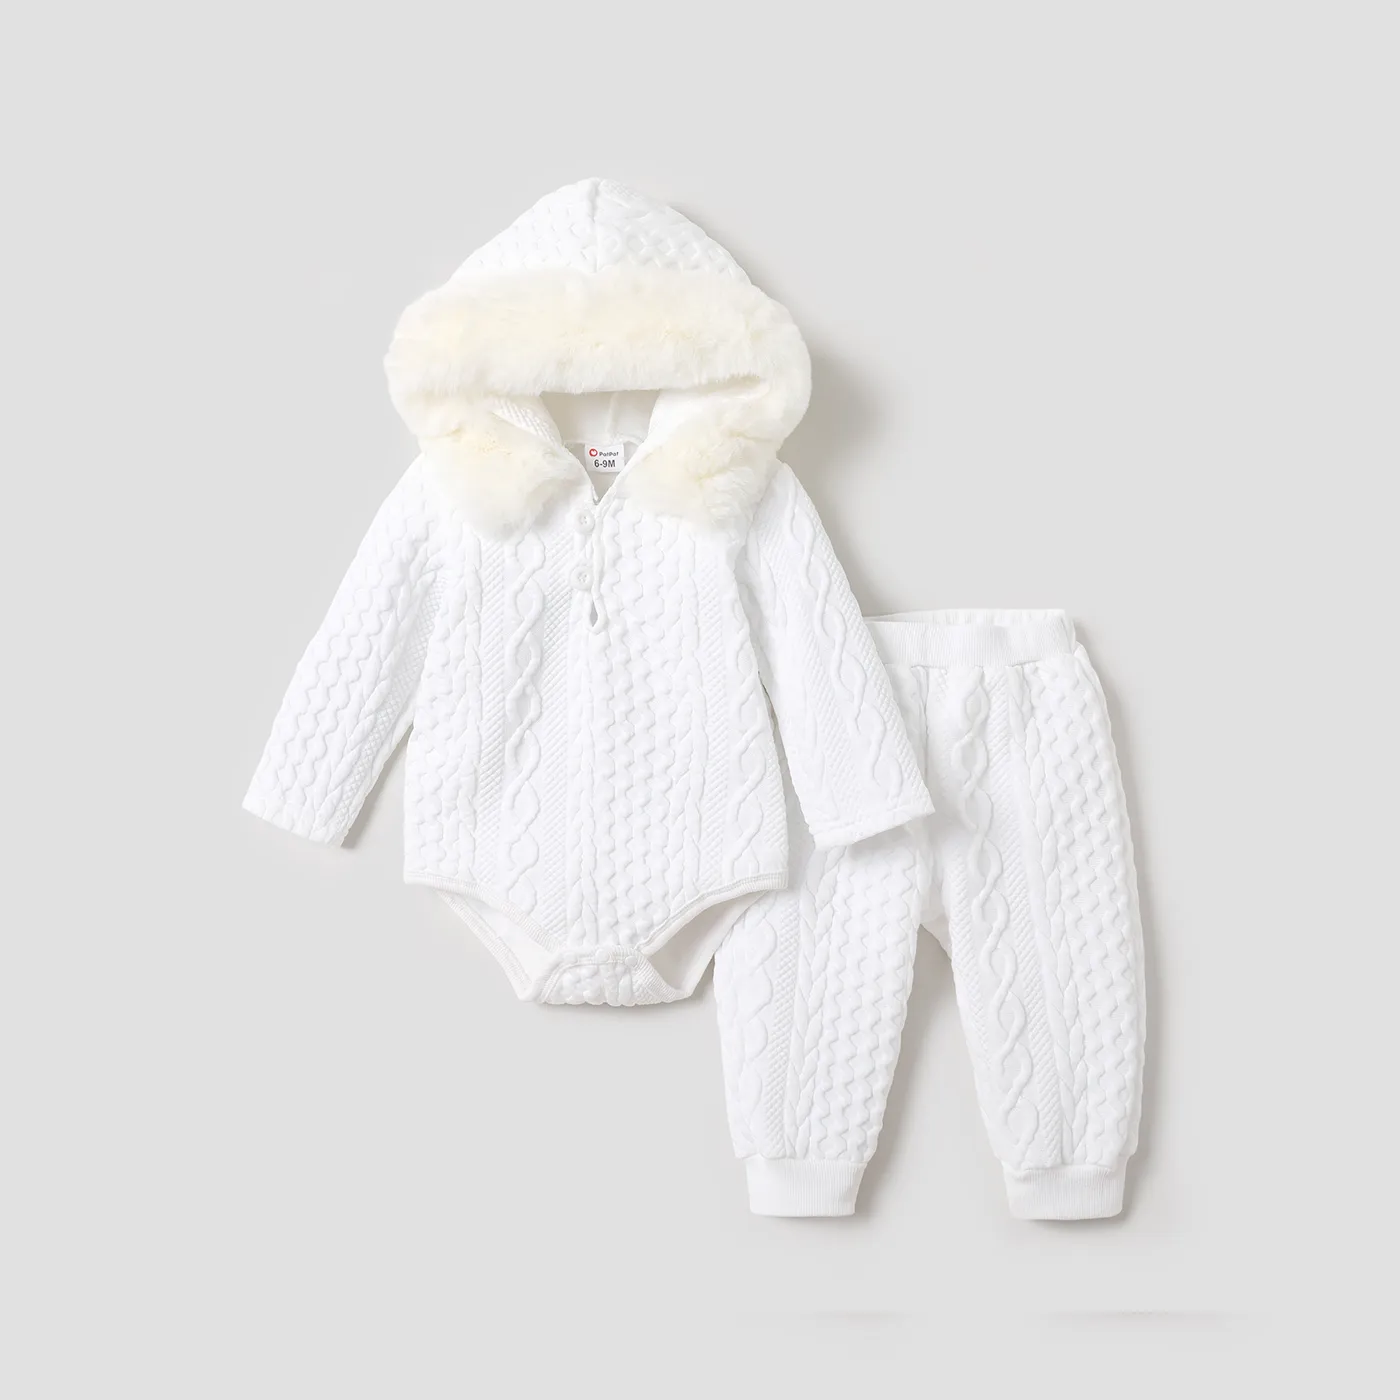 2pcs Baby Boy/Girl White Imitation Knitting Textured Spliced Faux Fur Hooded Long-sleeve Romper and 